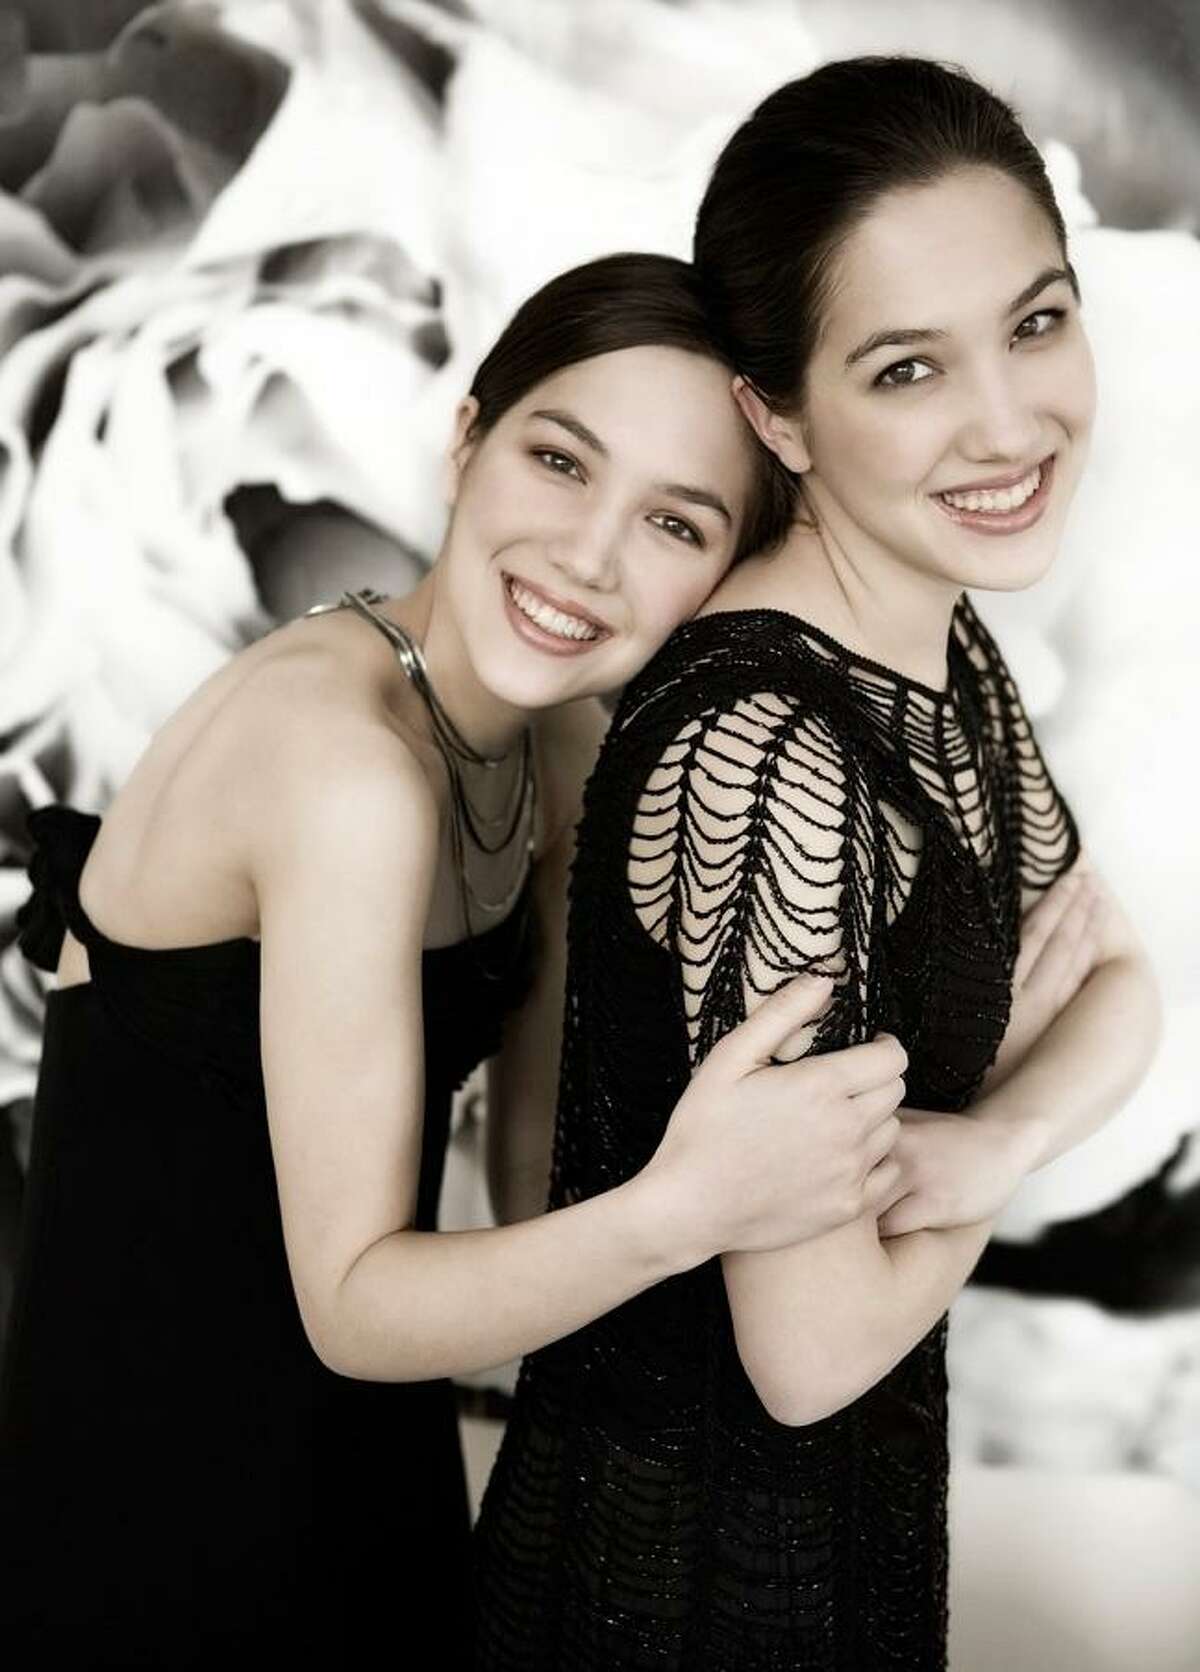 Duo-pianists and twin sisters Christina and Michelle Naughton performed Poulenc’s Concerto for Two Pianos with the San Antonio Symphony on Friday night.